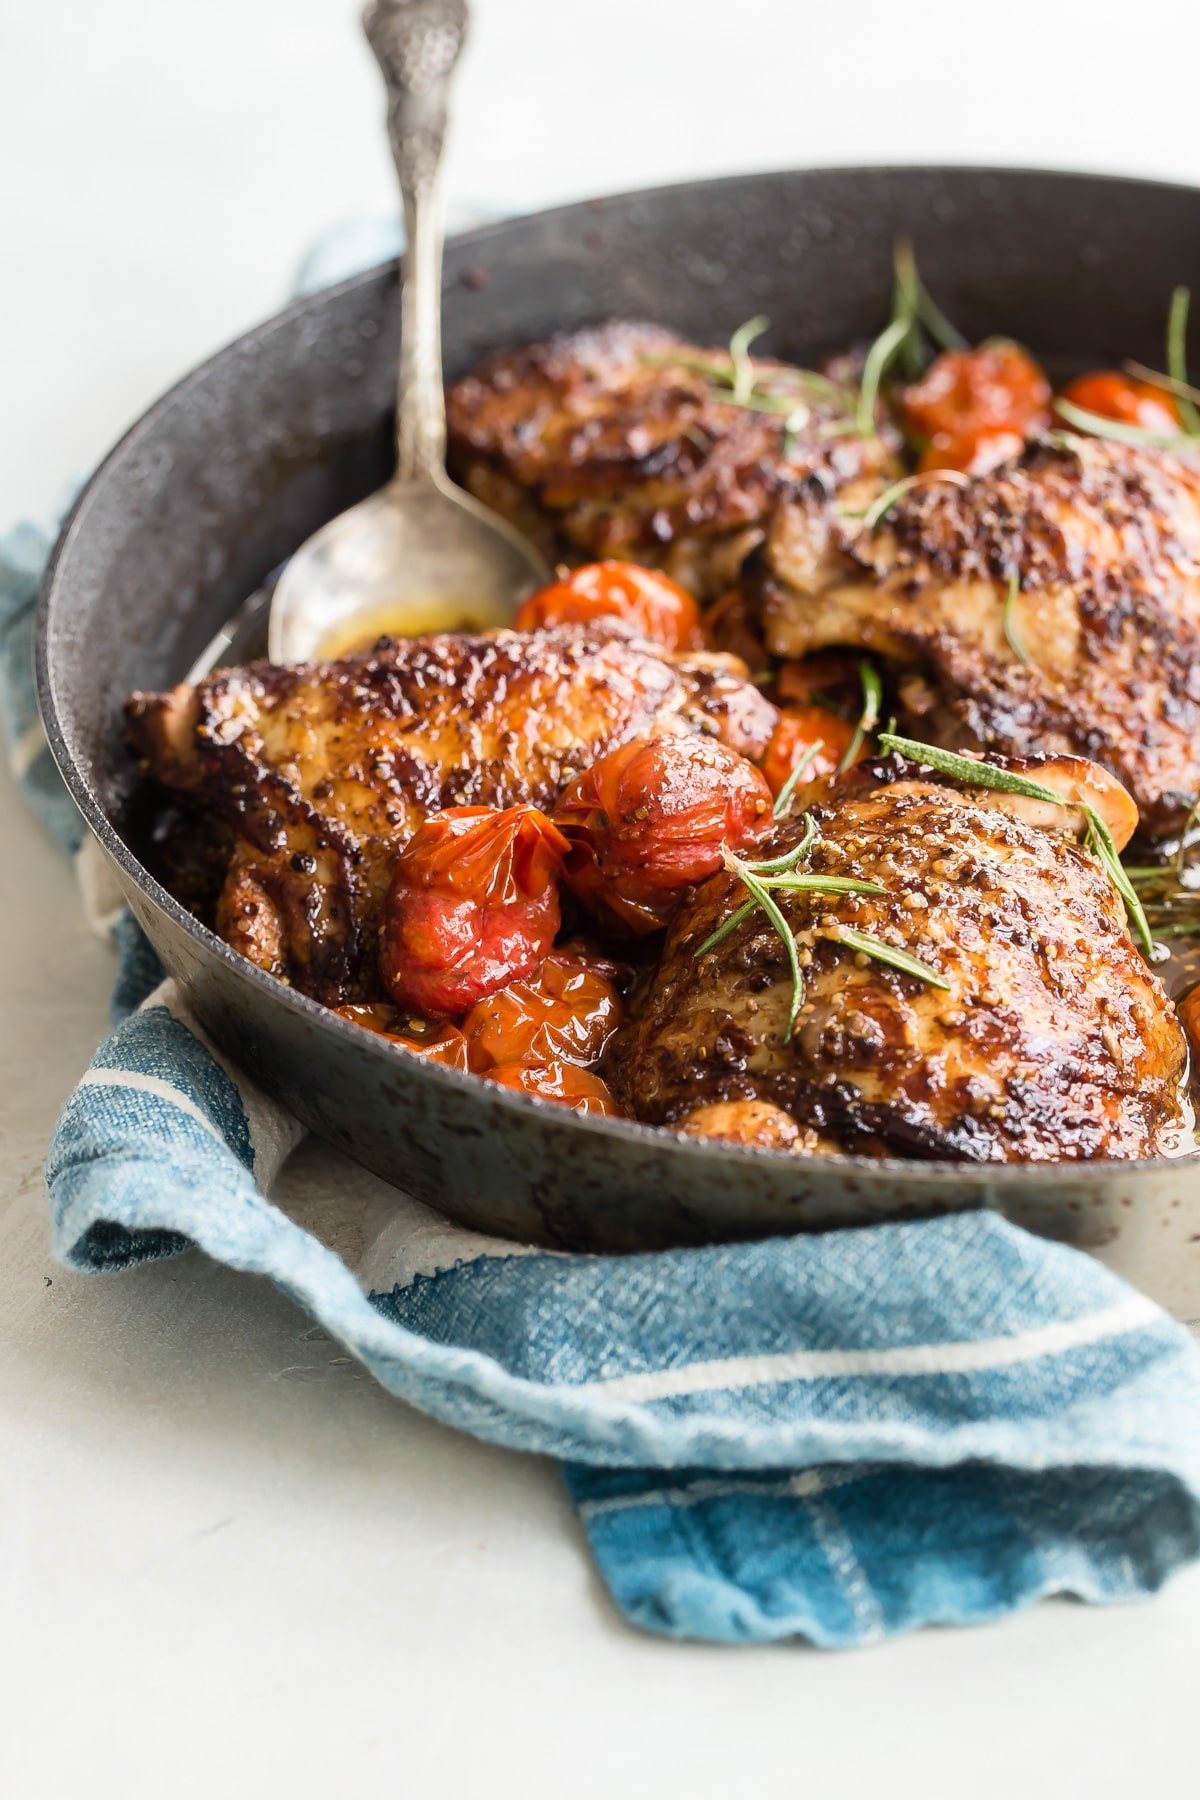 Cooked balsamic chicken and tomatoes in a black skillet.